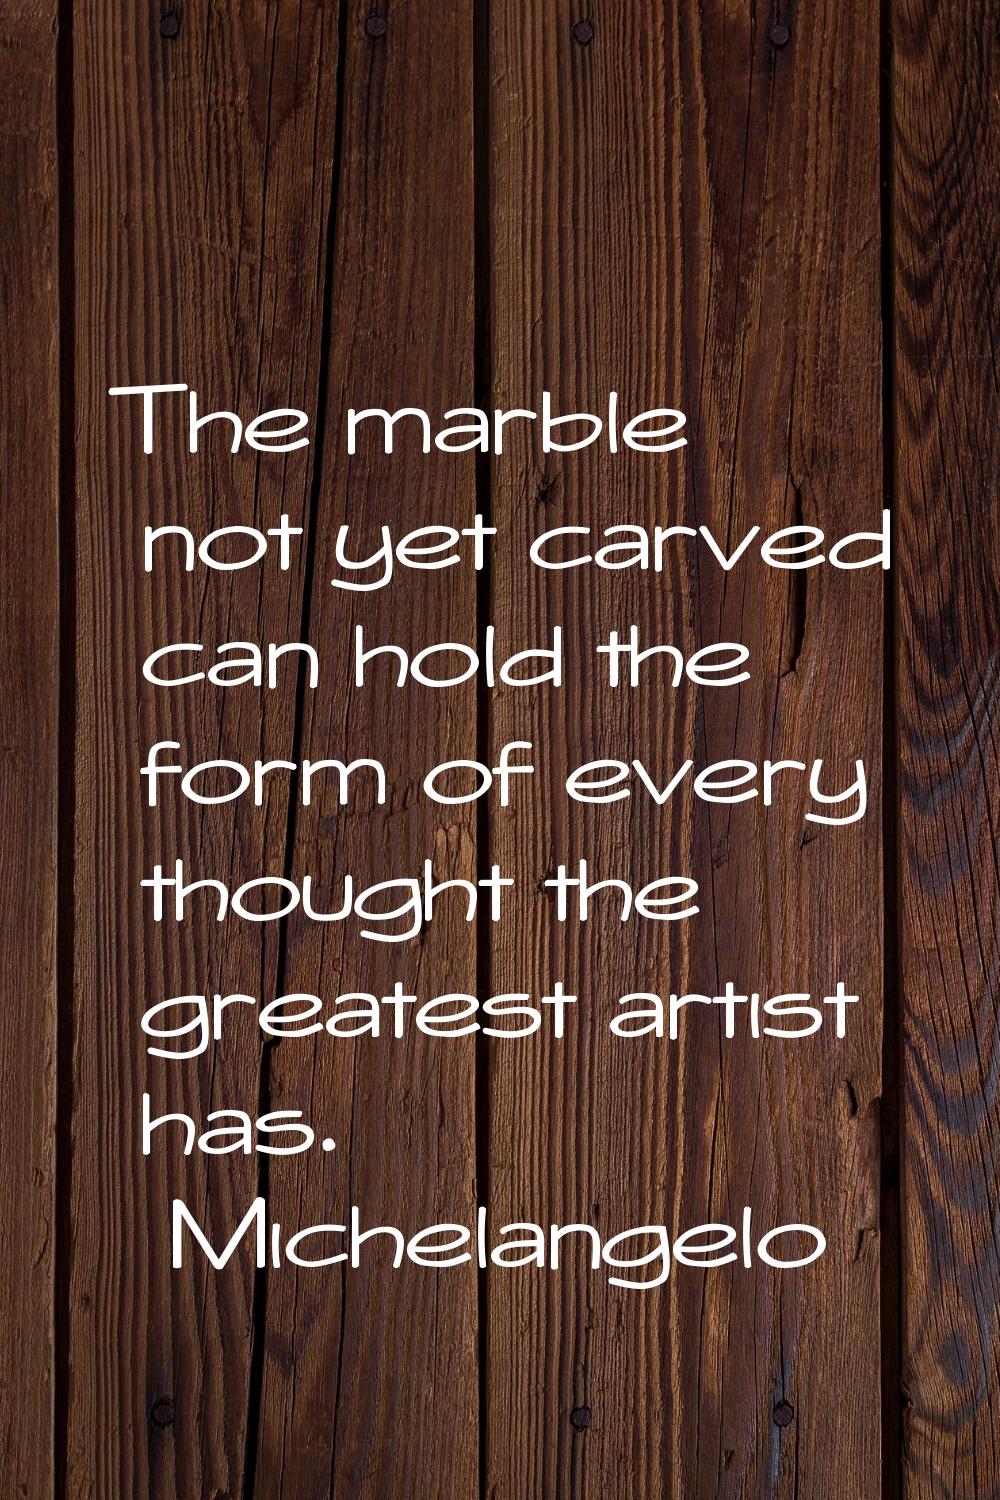 The marble not yet carved can hold the form of every thought the greatest artist has.